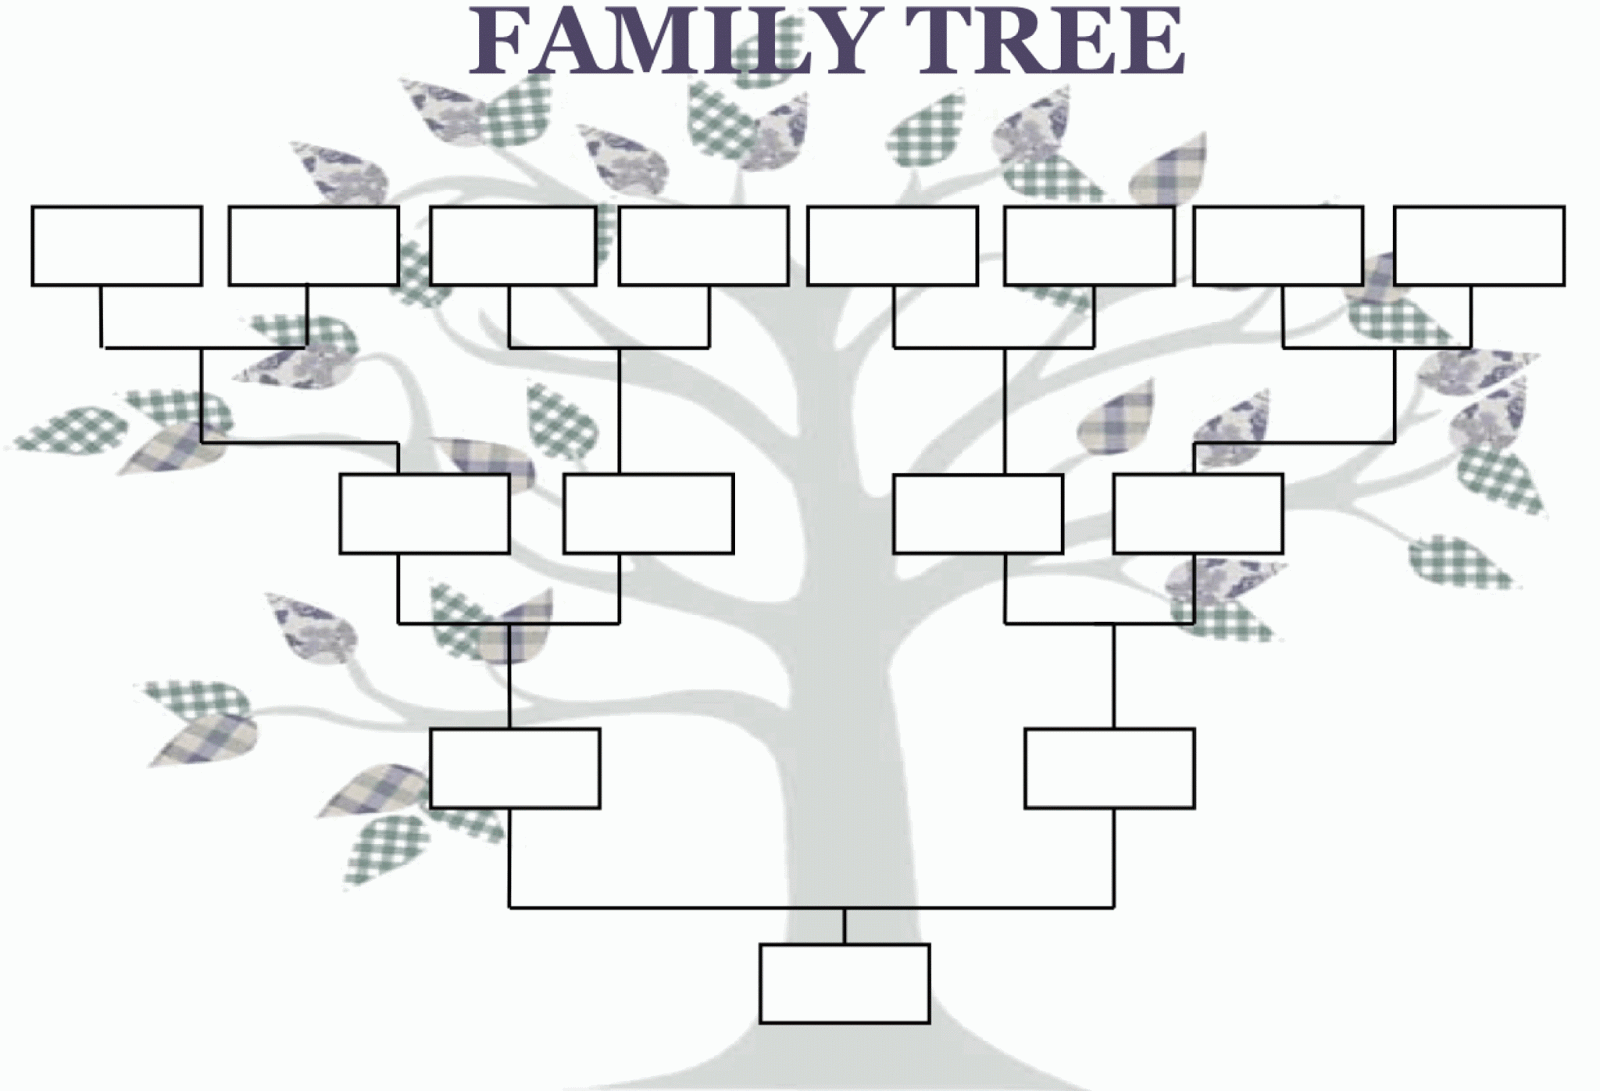 How to start your family tree